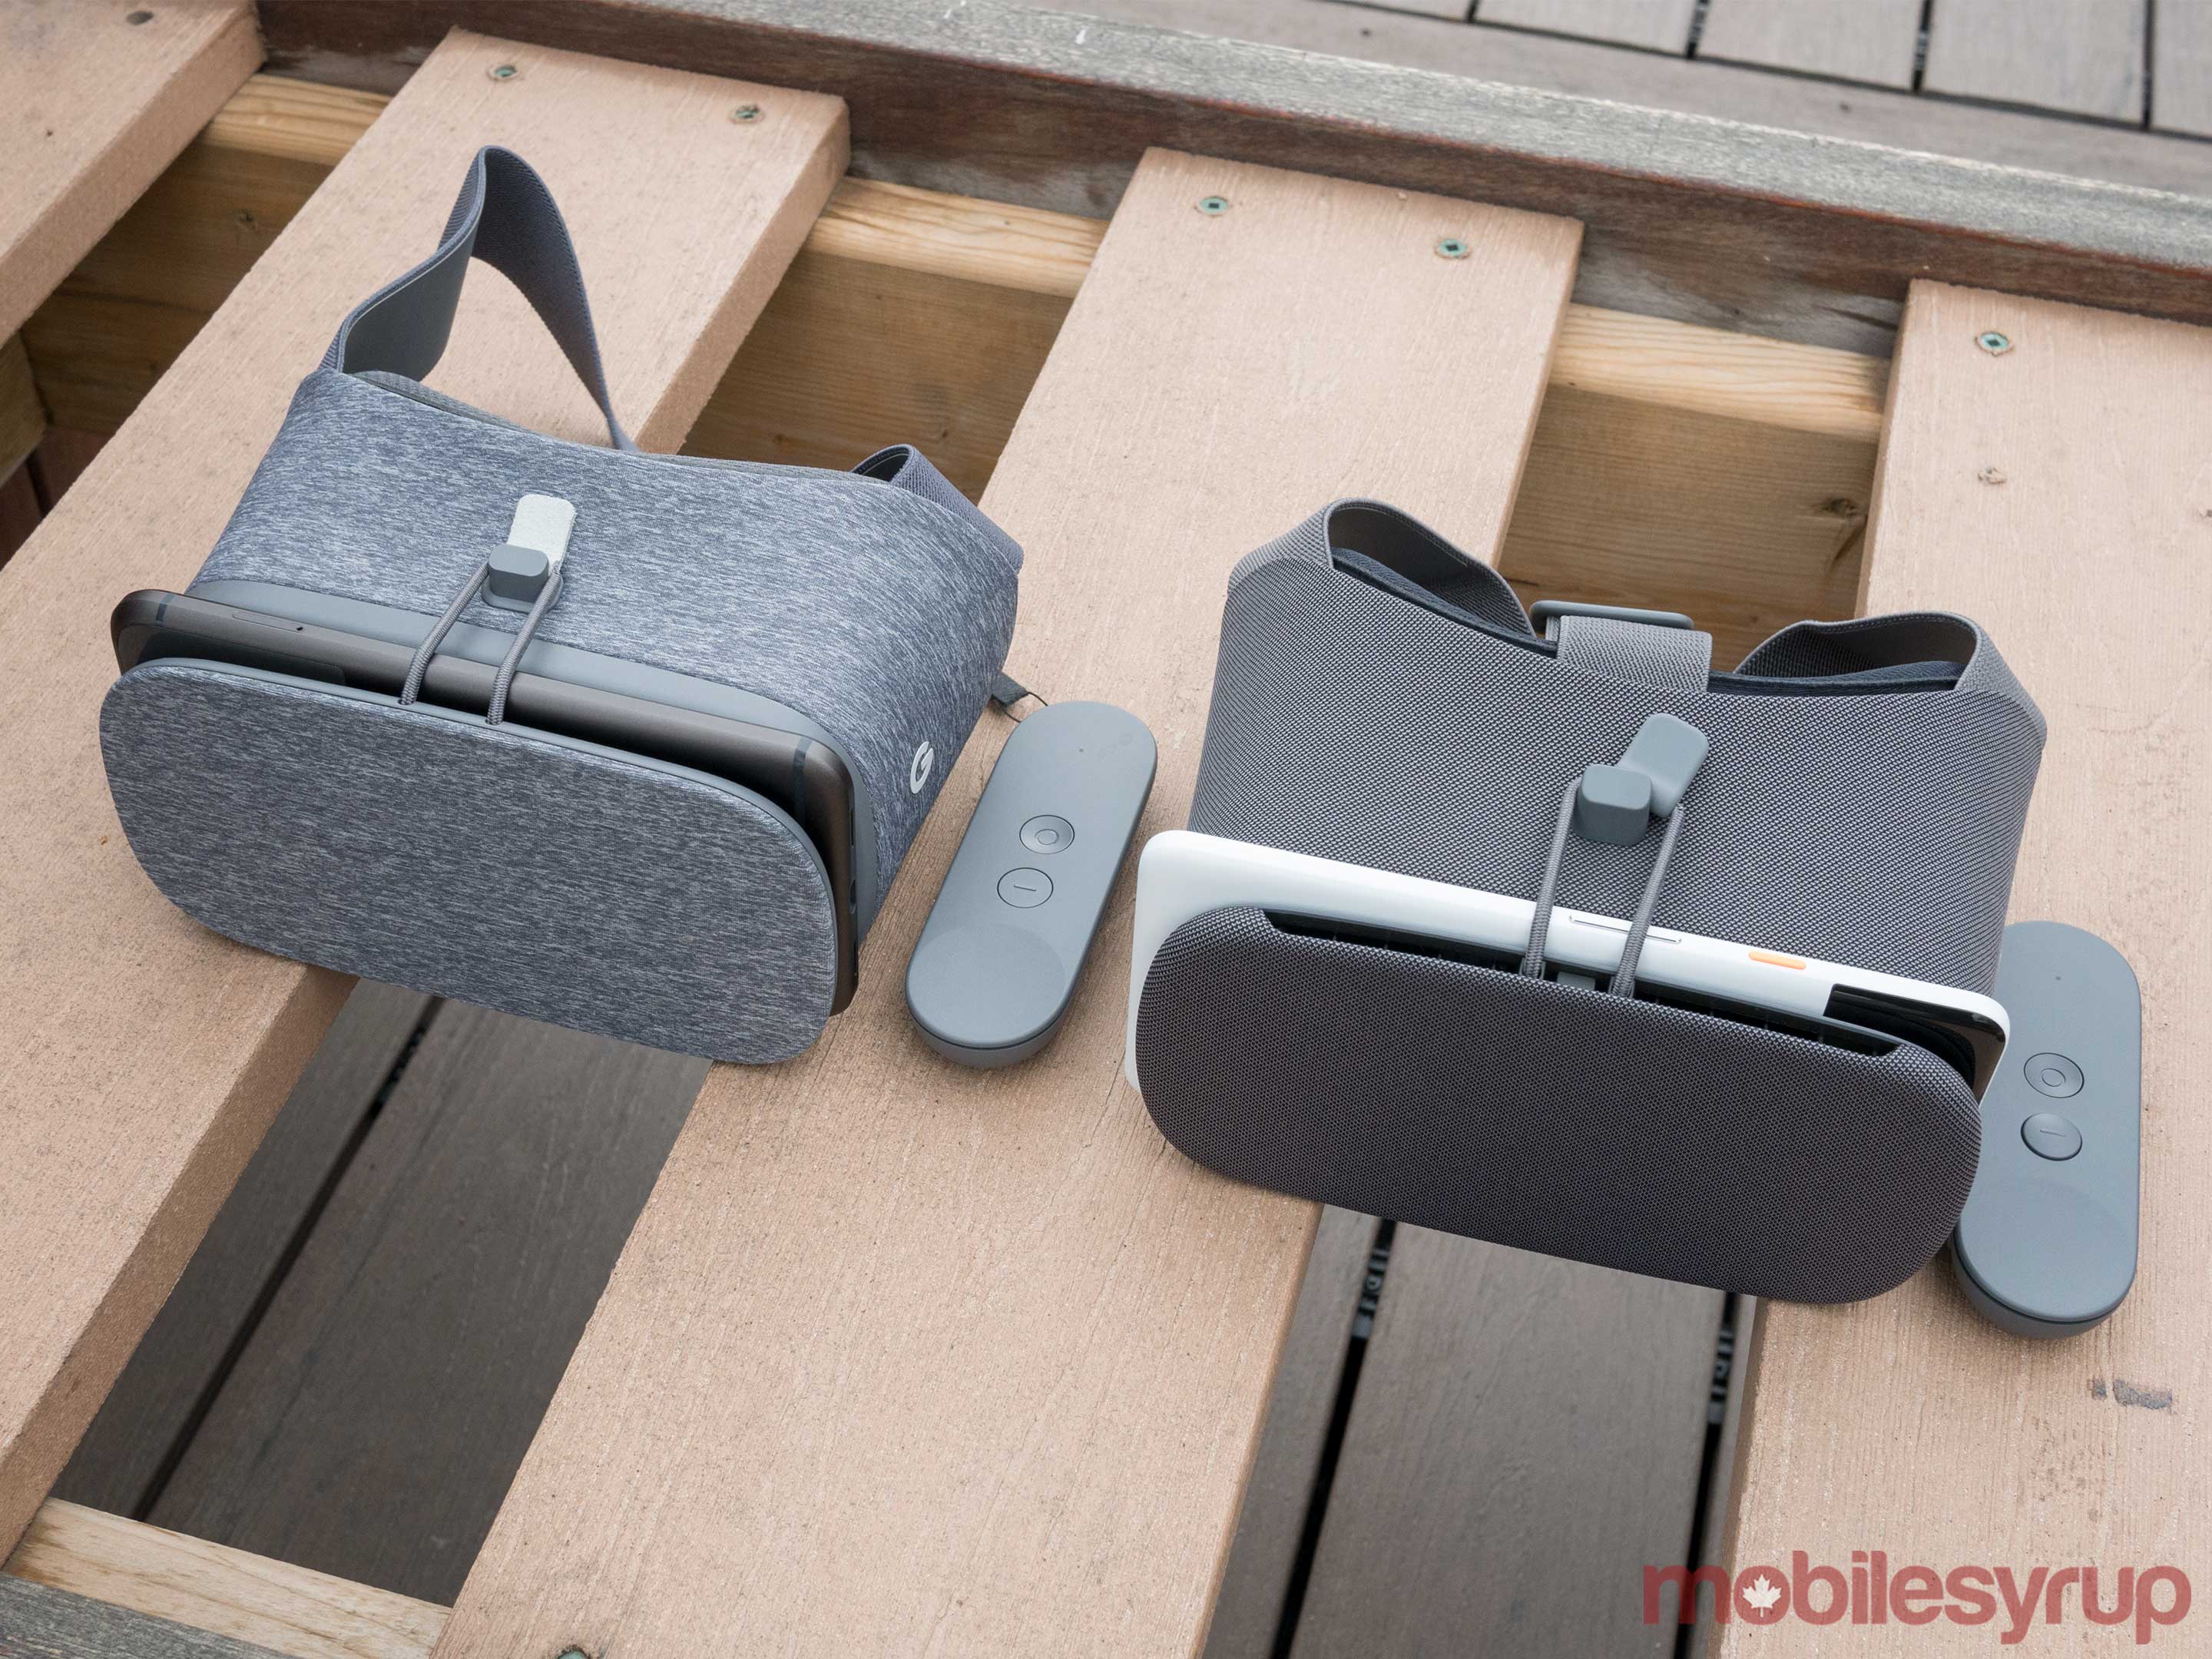 New Daydream View vs old Daydream View